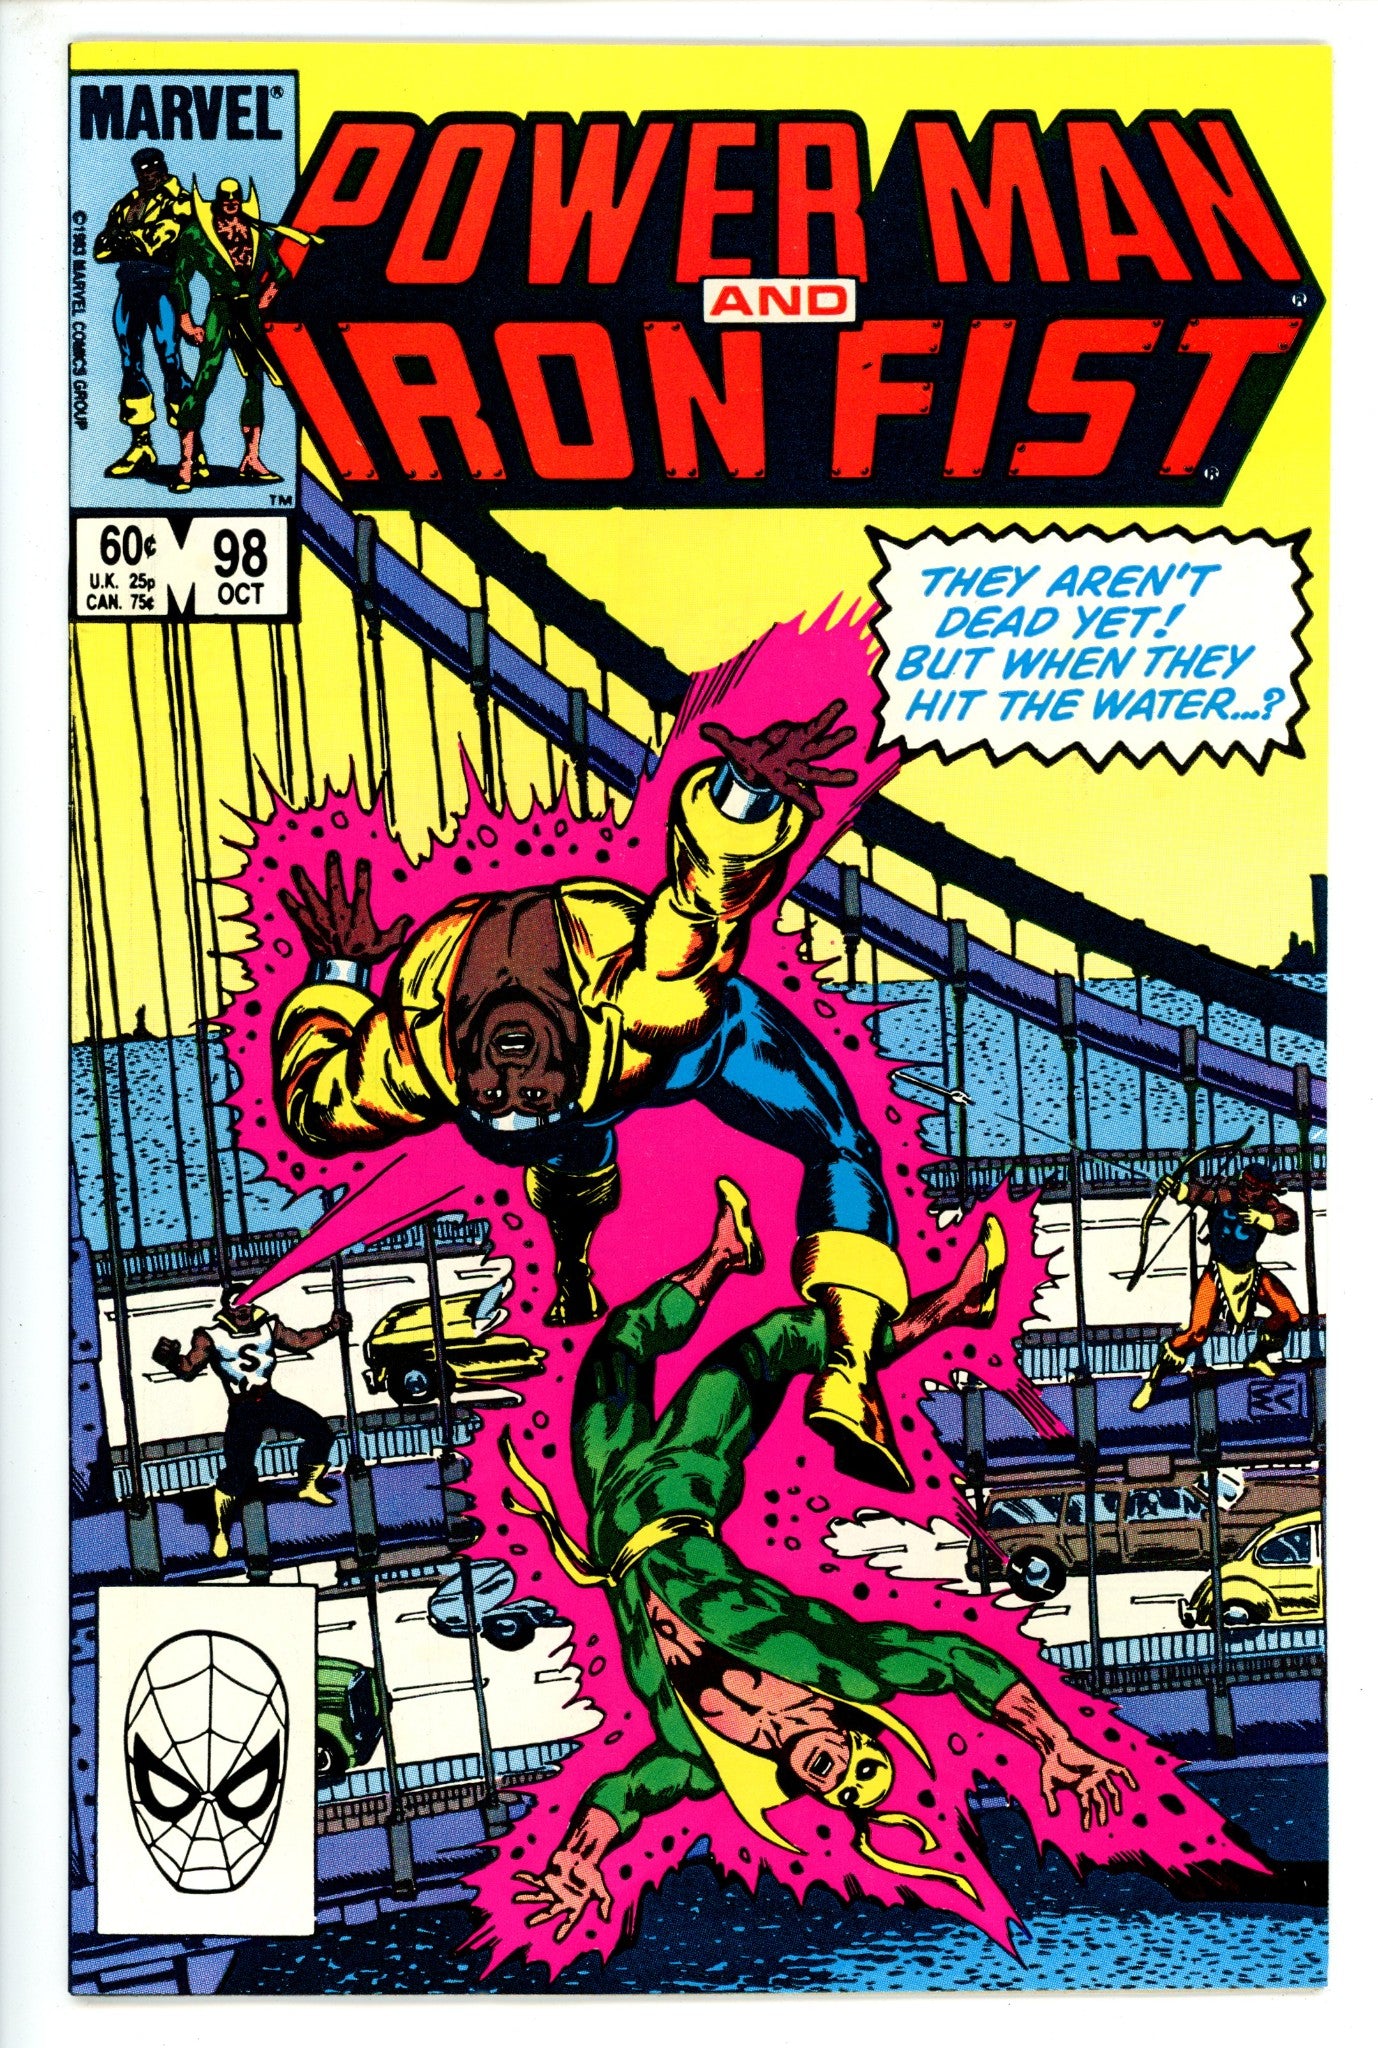 Power Man and Iron Fist Vol 1 98